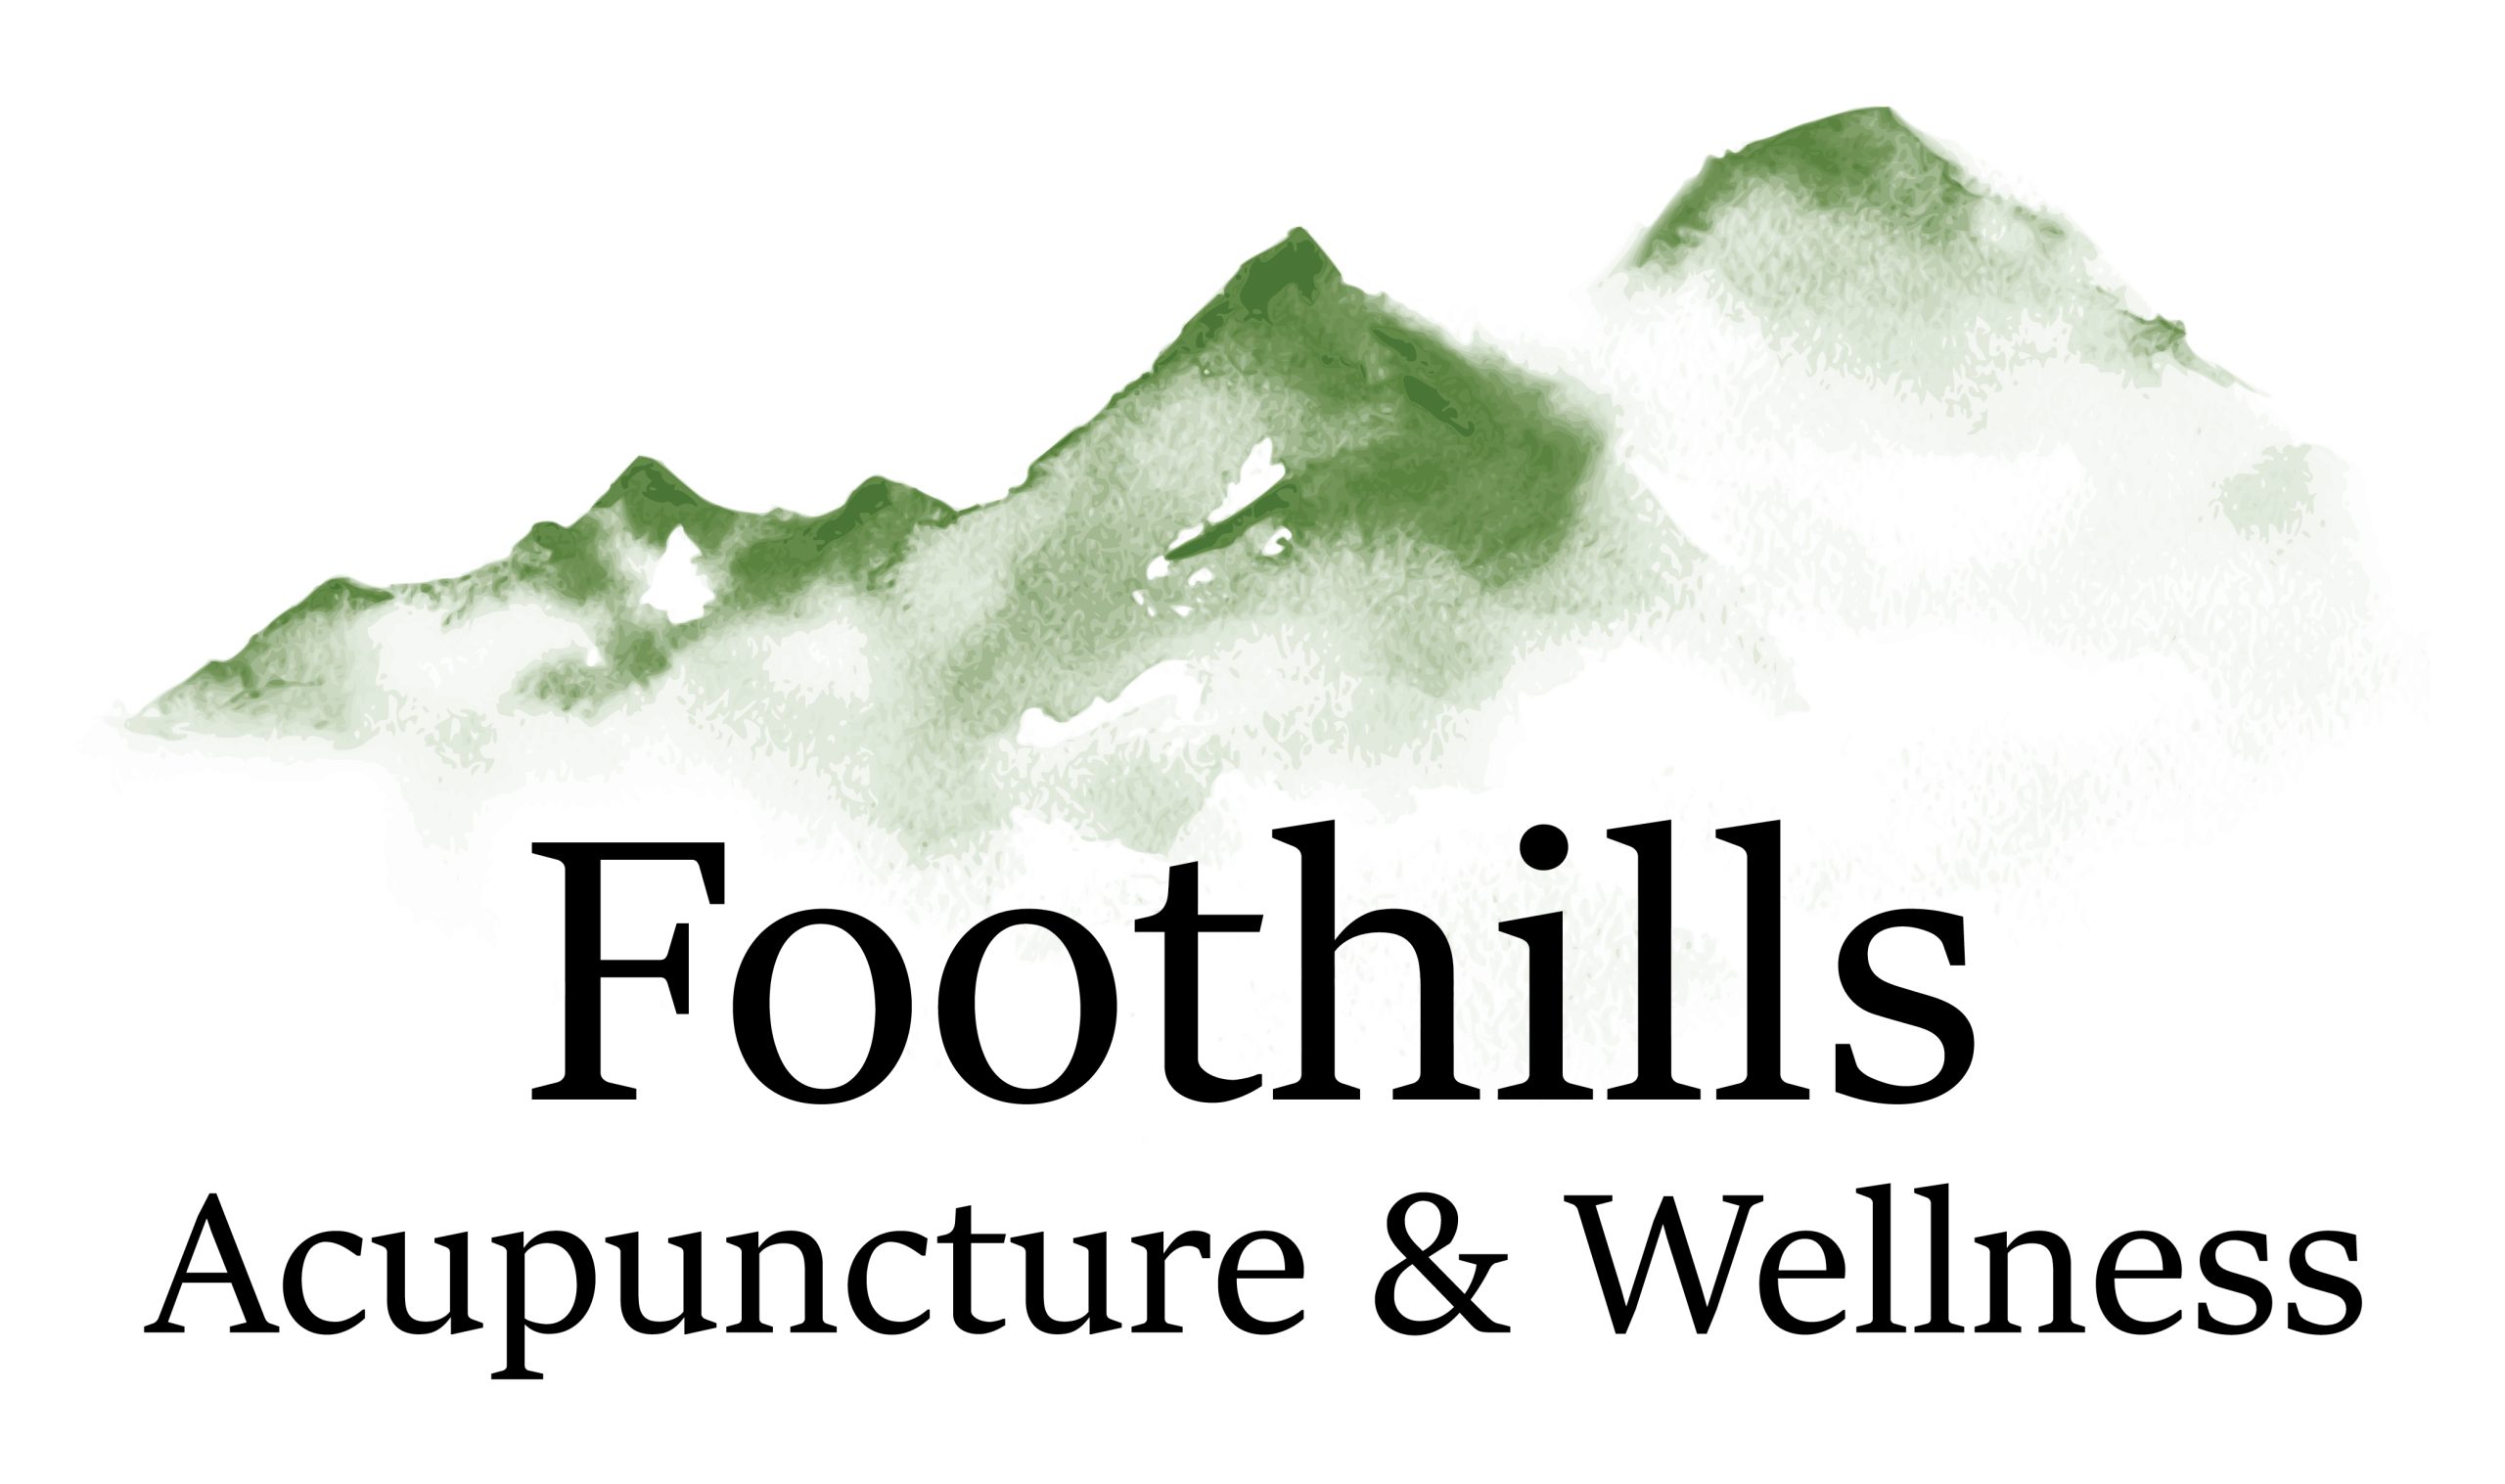 Foothills Acupuncture & Wellness